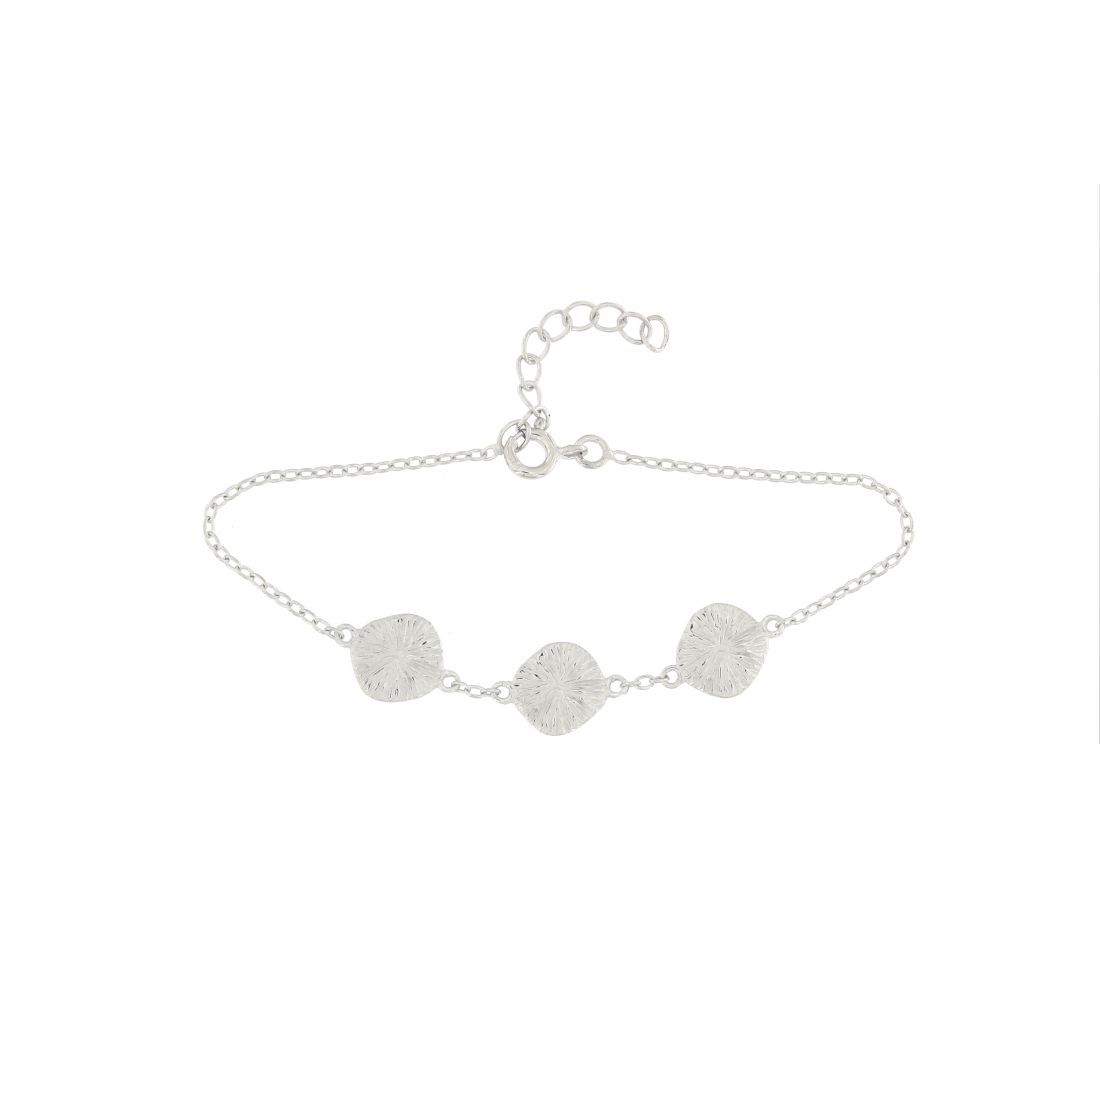 SILVER BRACELET WITH THREE CIRCLES